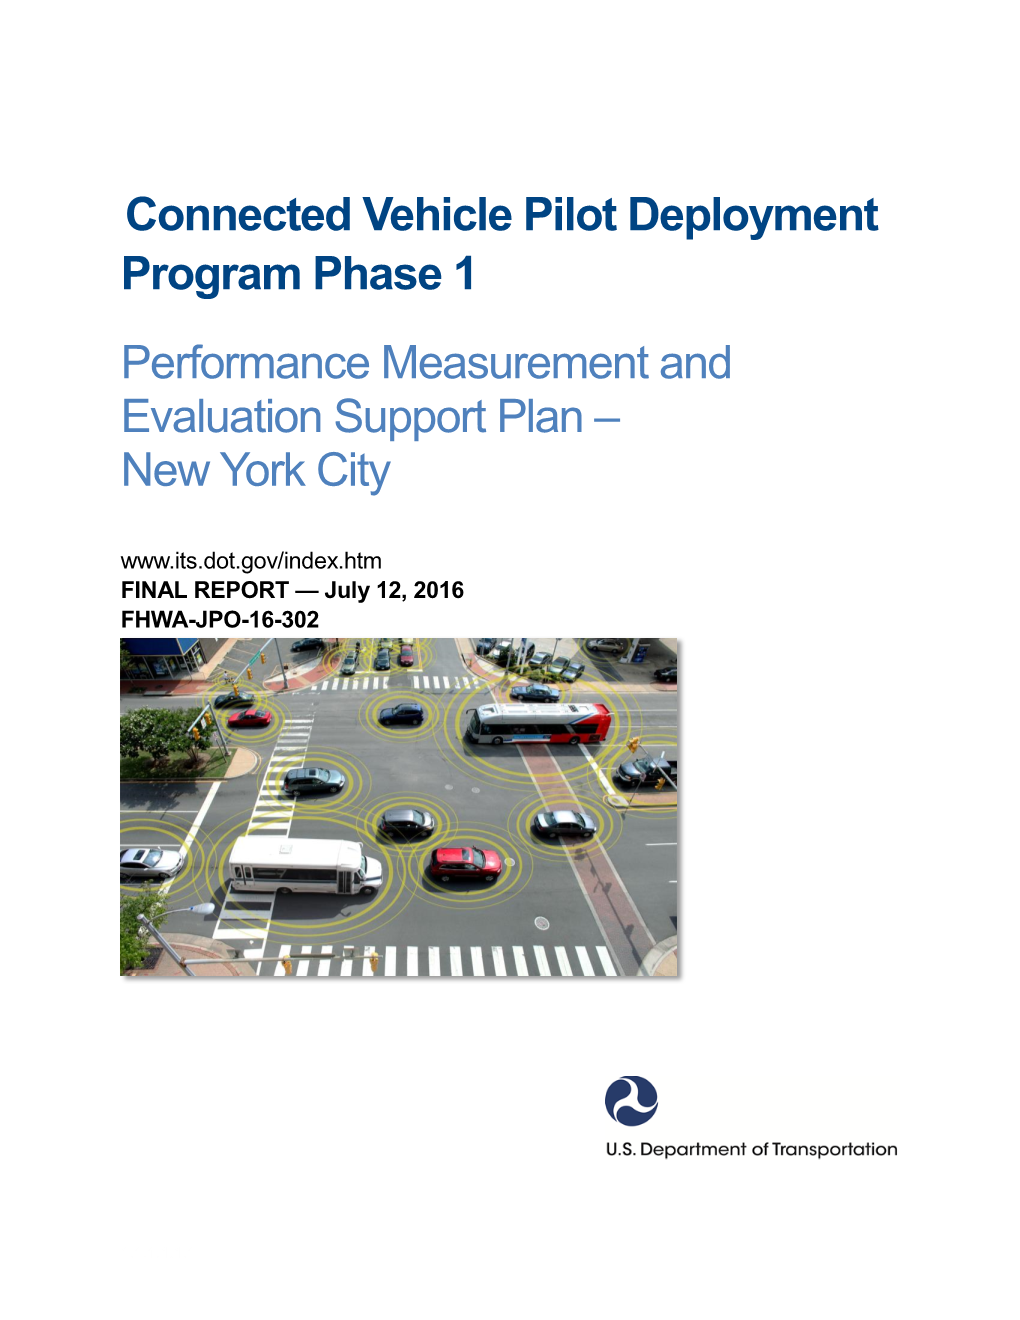 Connected Vehicle Pilot Deployment Program Phase 1 Performance Measurement and Evaluation Support Plan – New York City